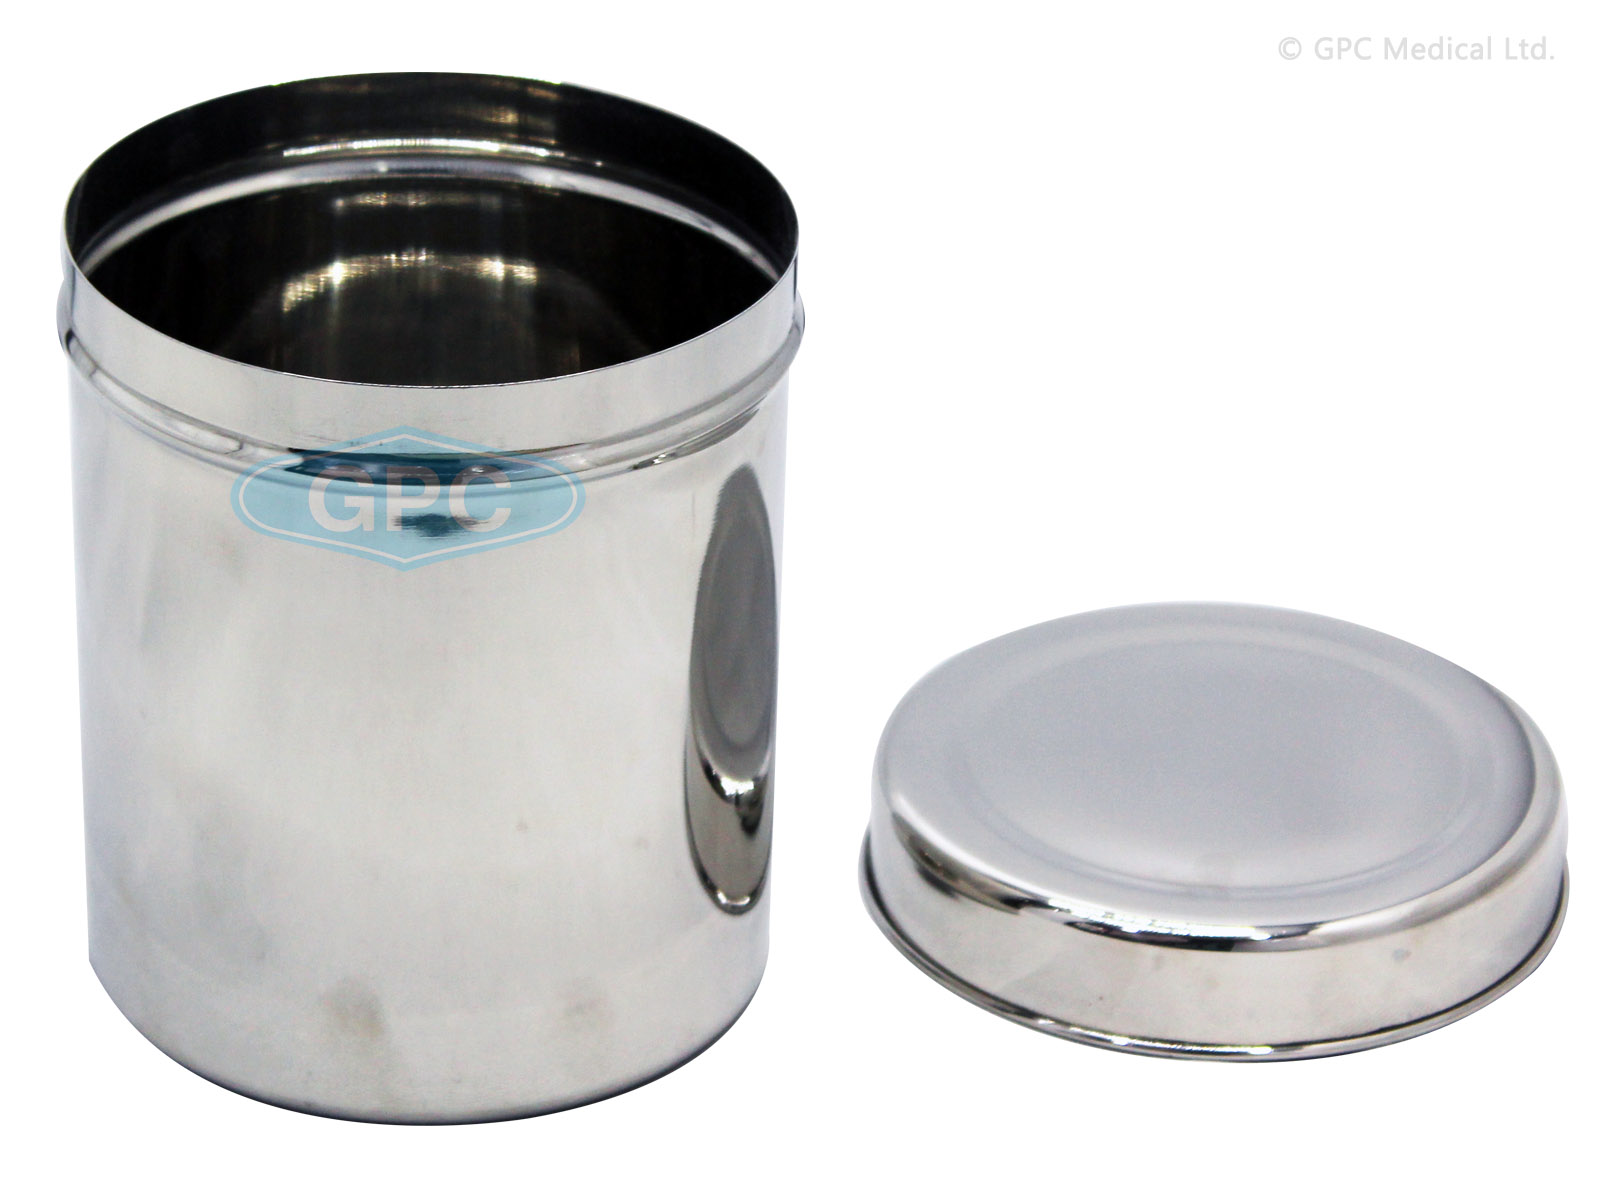 https://www.gpcmedical.com/product_more_images-webp/Dressing-Jars-with-cover-Stainless-Steel-JDS70-1.webp